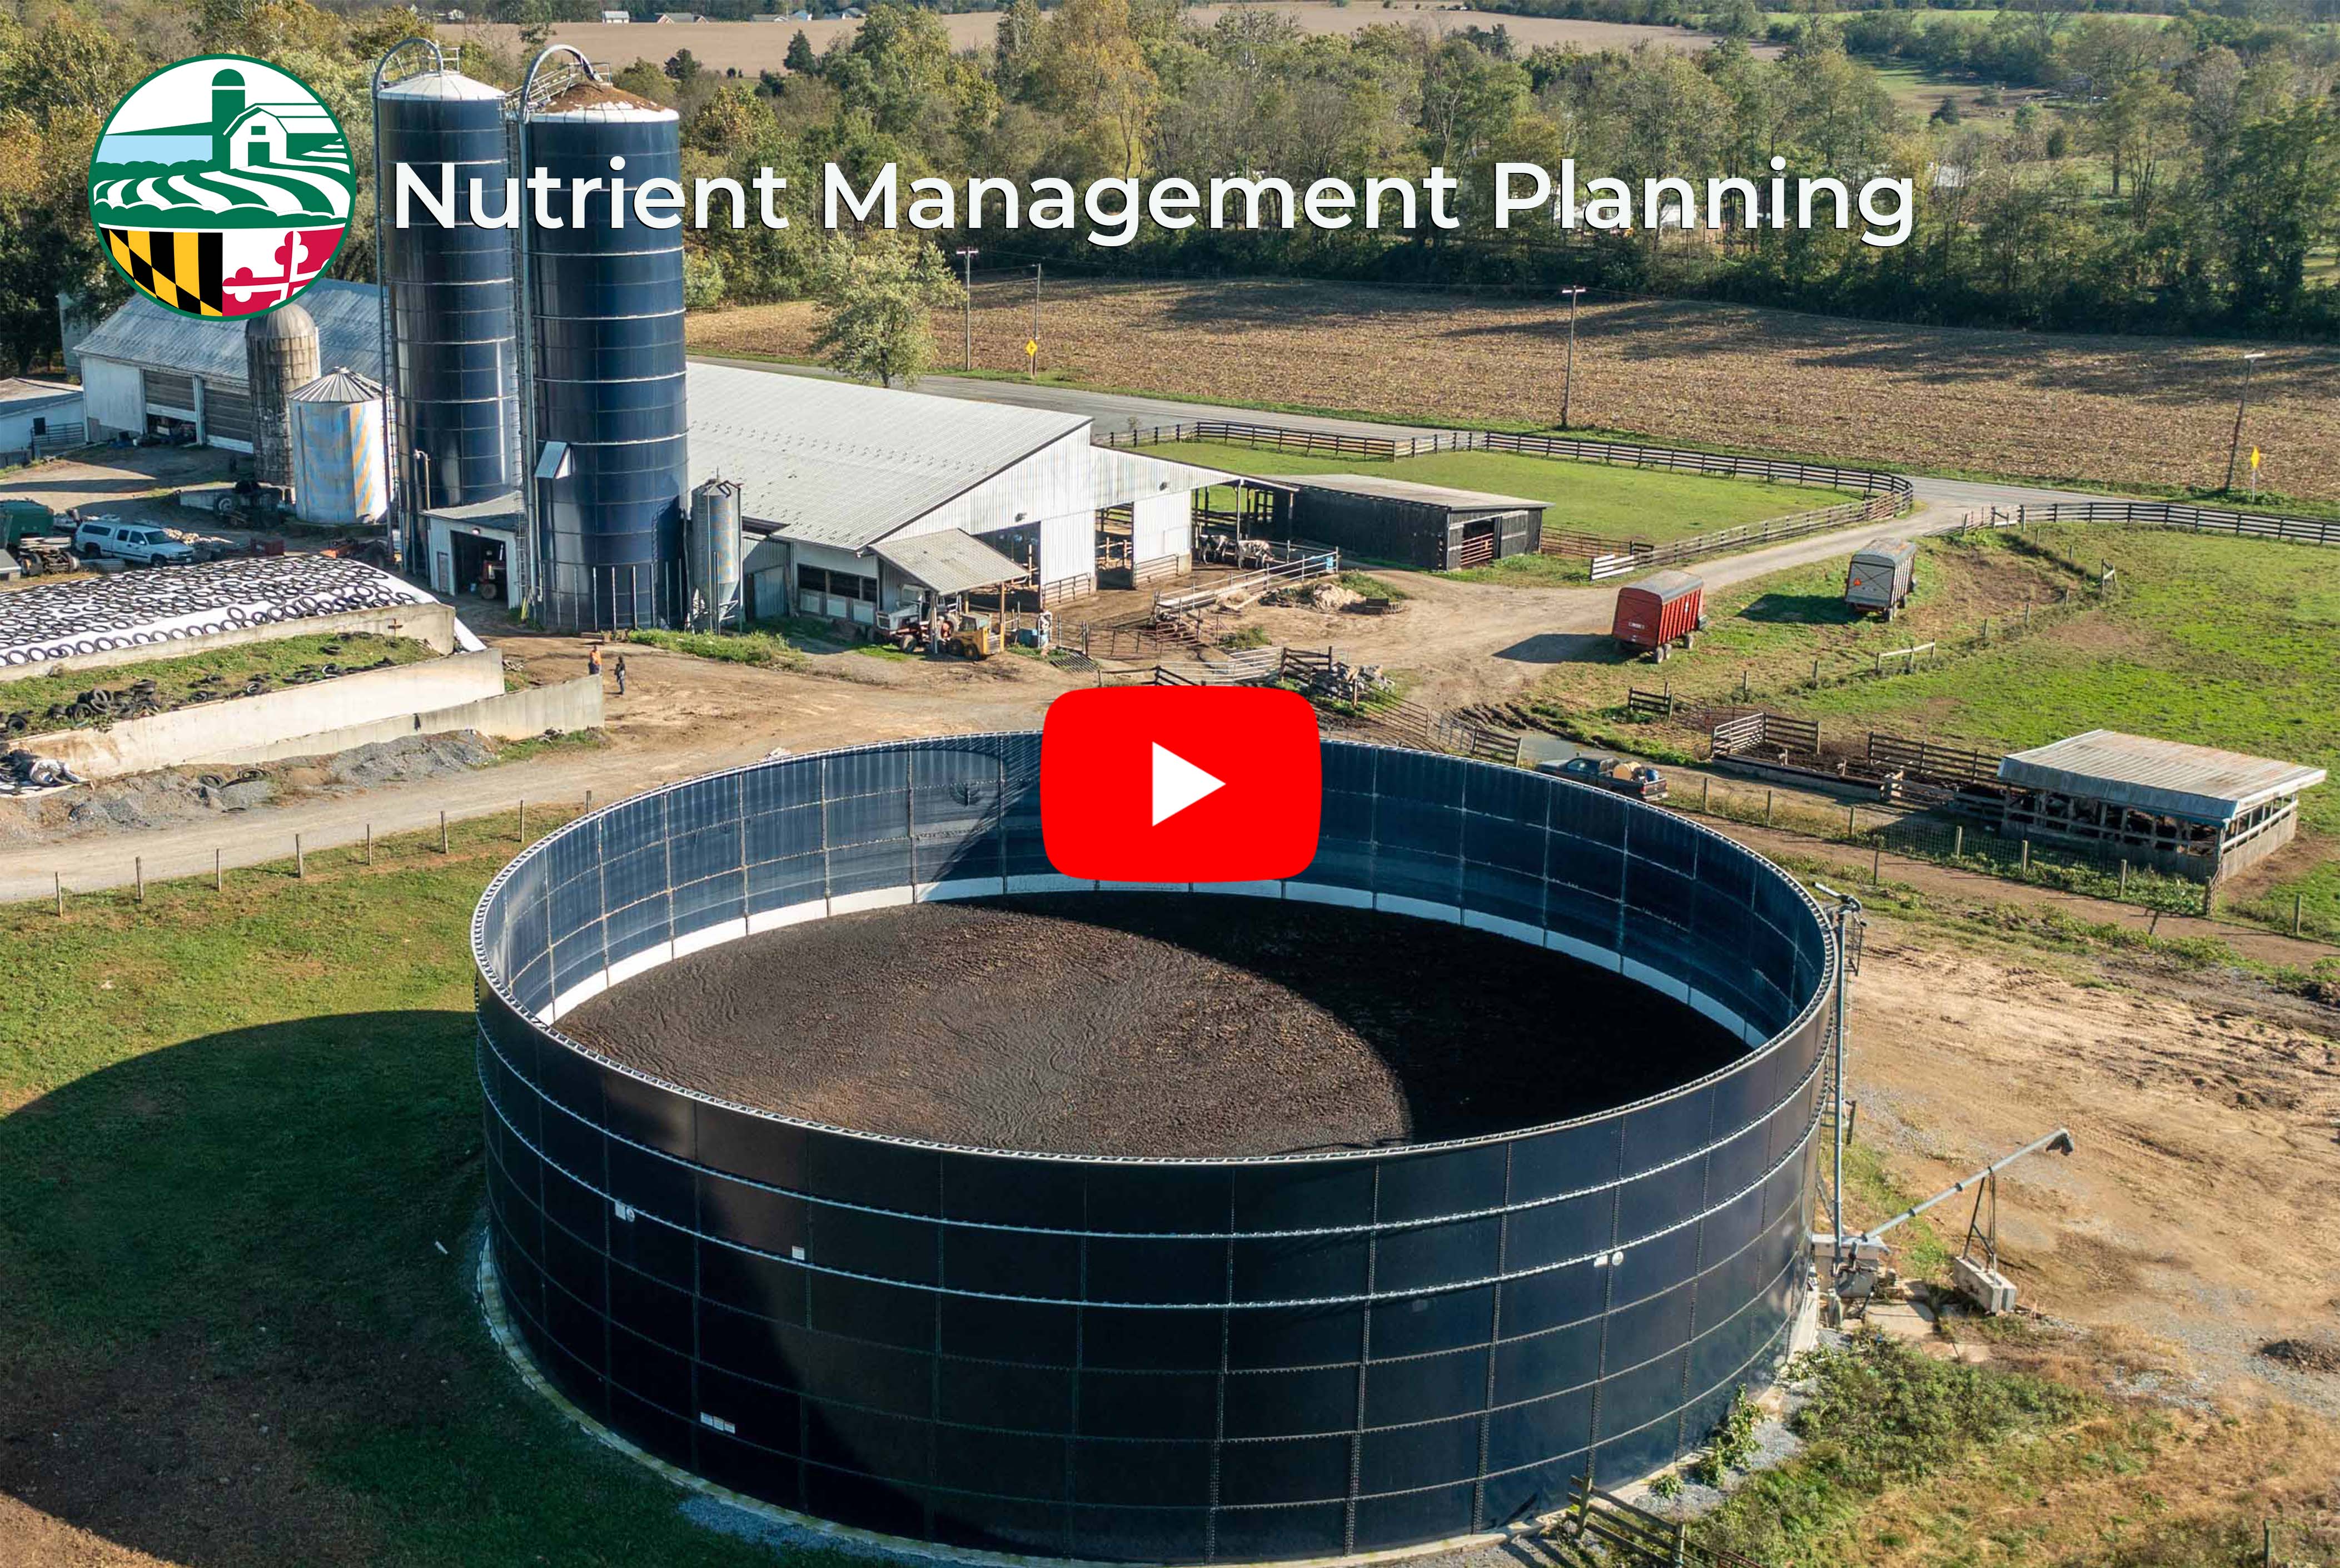 FARMING WITH YOUR NUTRIENT MANAGEMENT PLAN